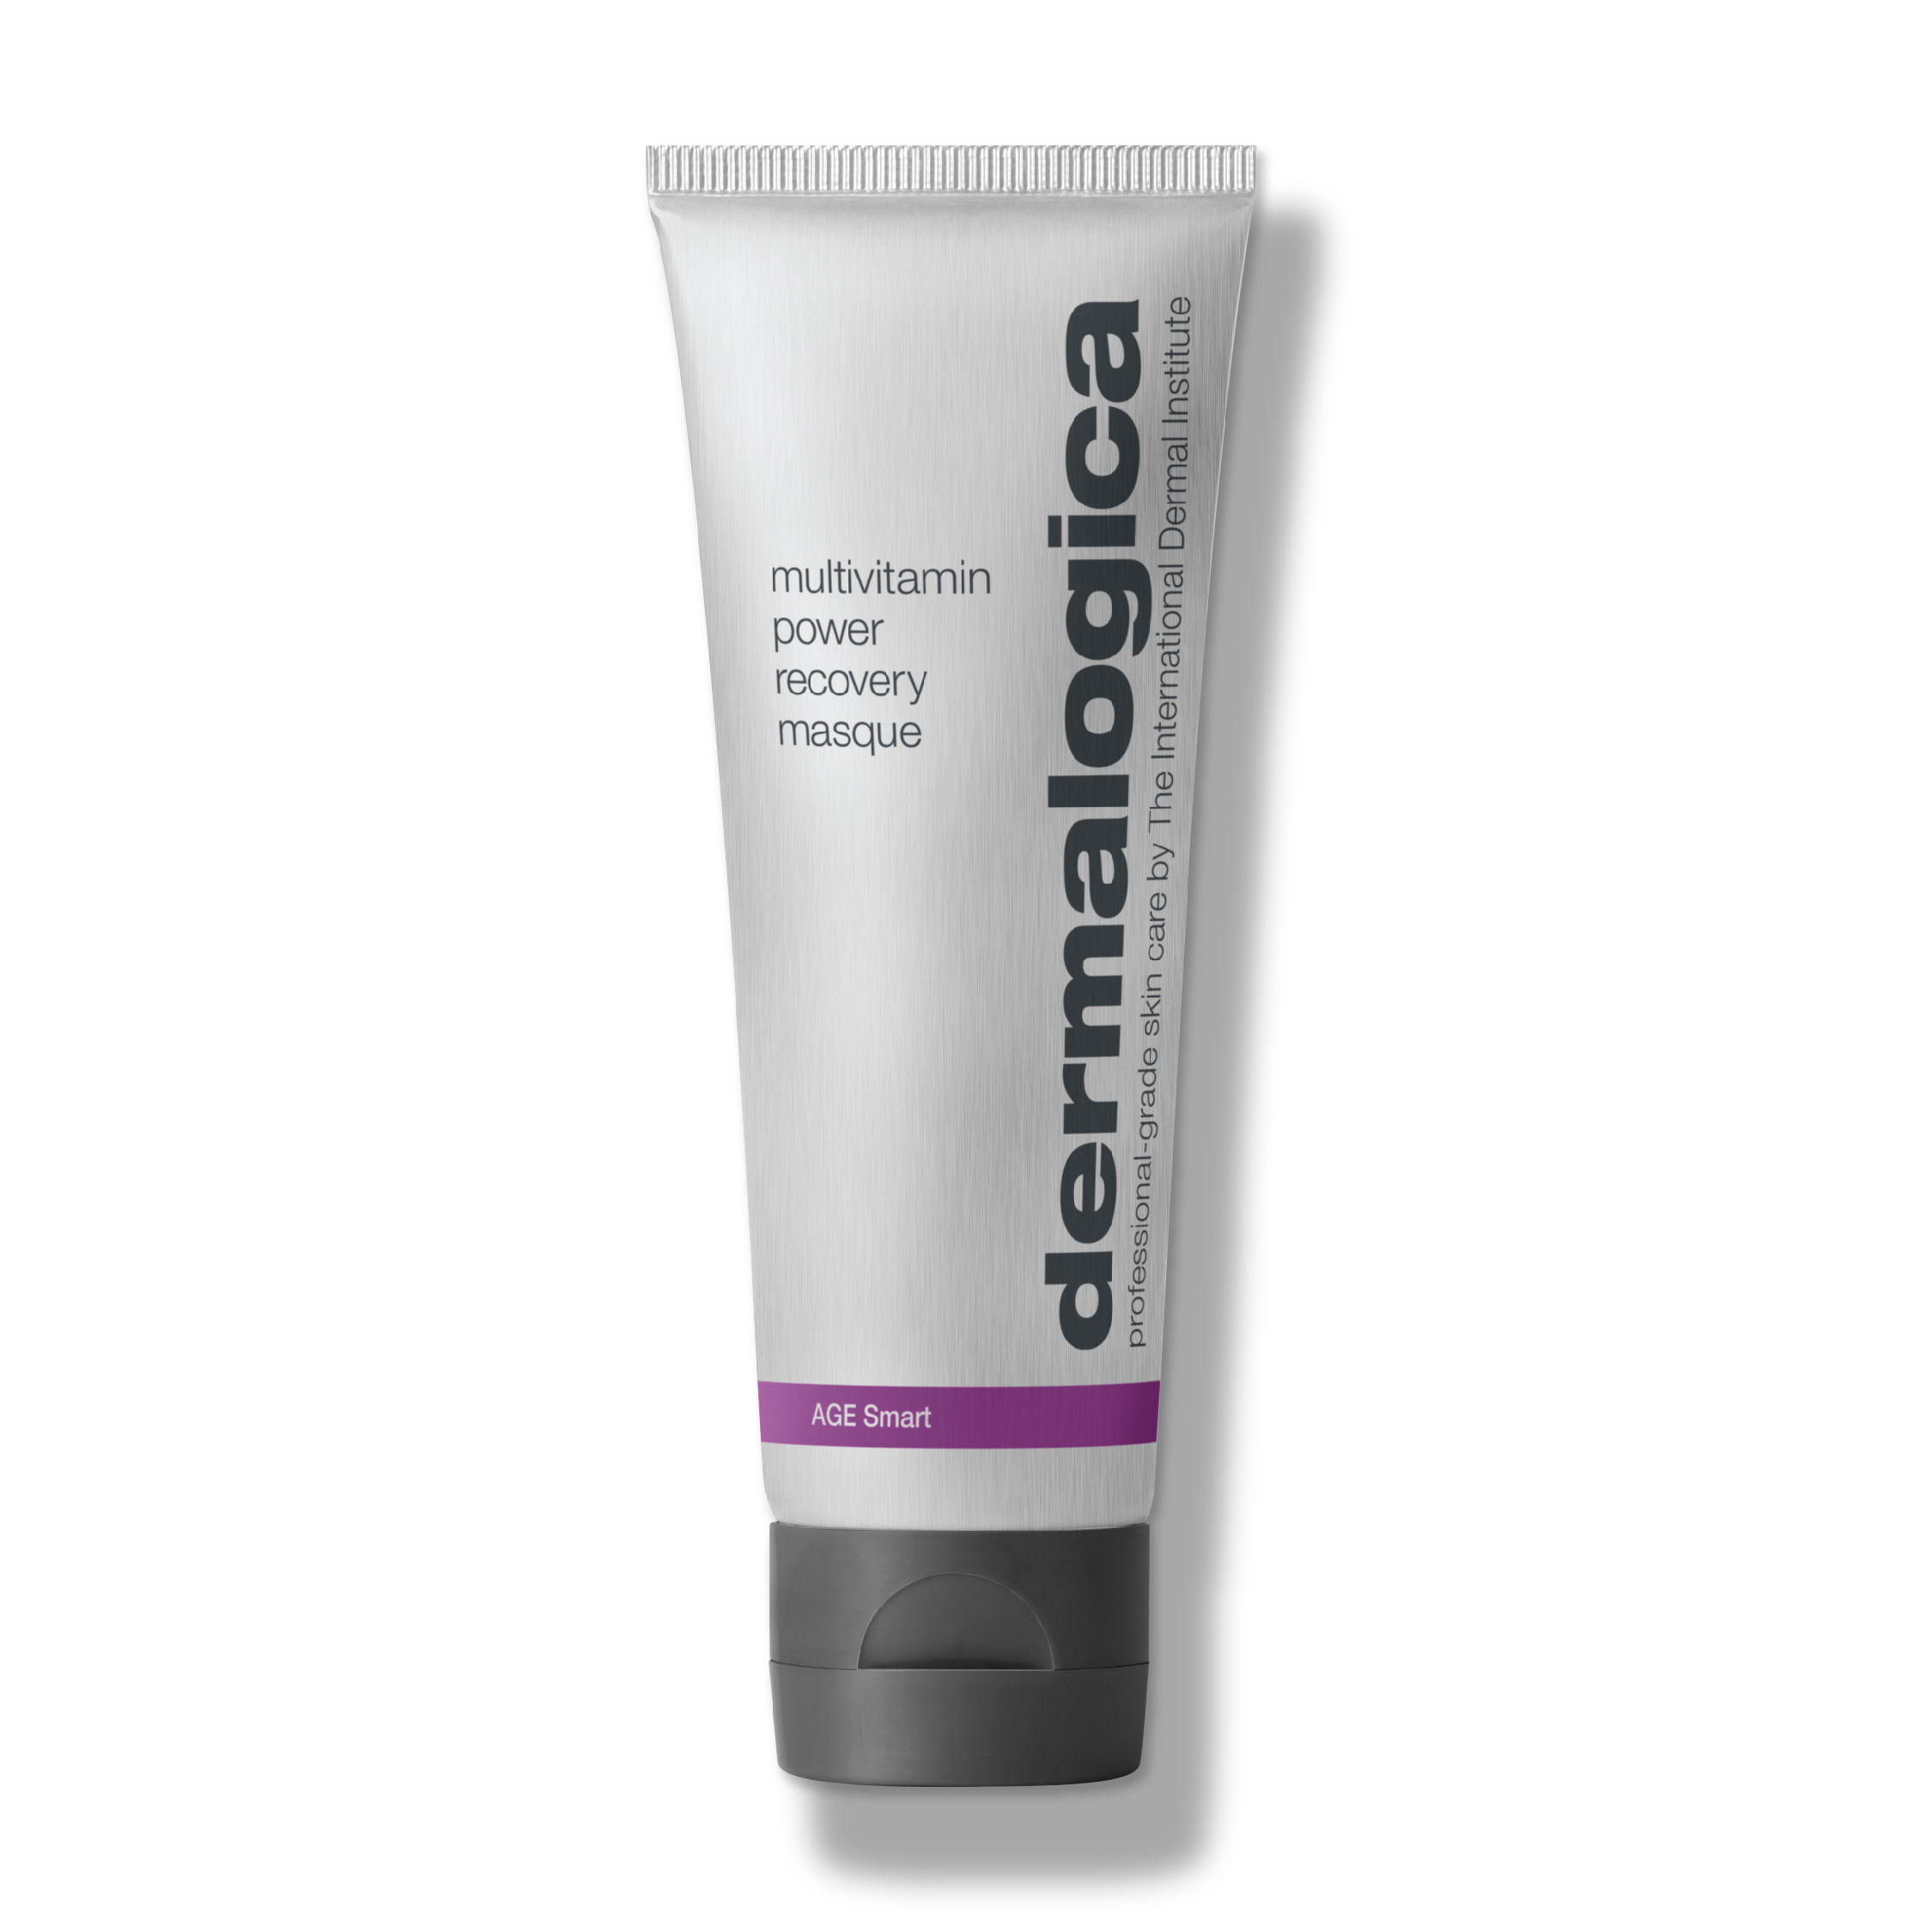 Dermalogica MultiVit Power Recovery Masque Face Mask for Glowing Skin